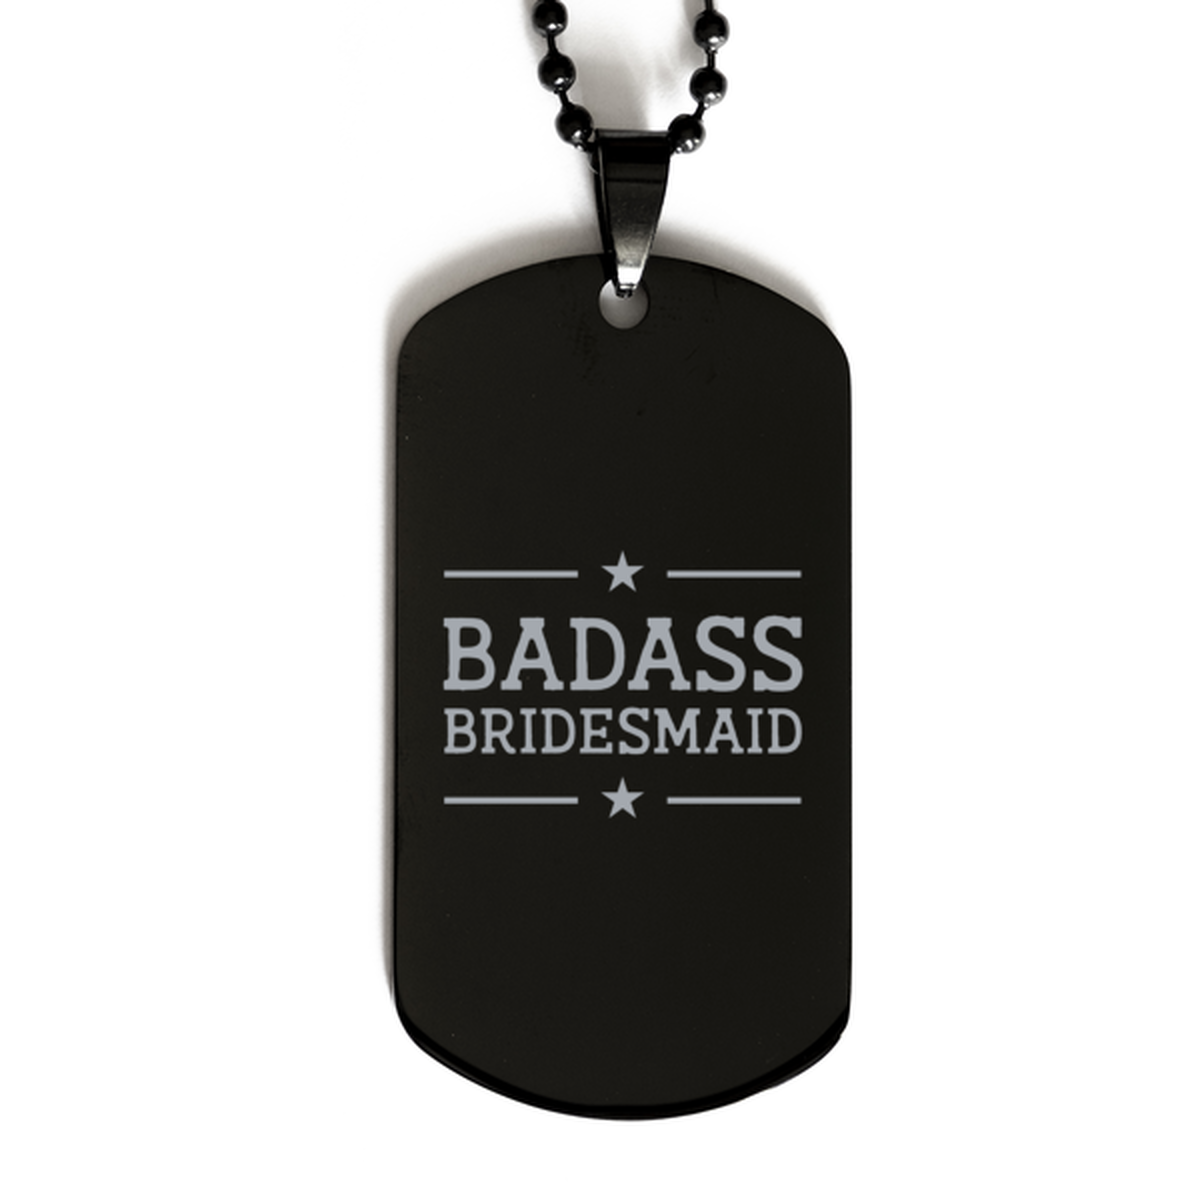 Bridemaid Black Dog Tag, Badass Bridemaid, Funny Family Gifts  Necklace For Bridemaid From Bride